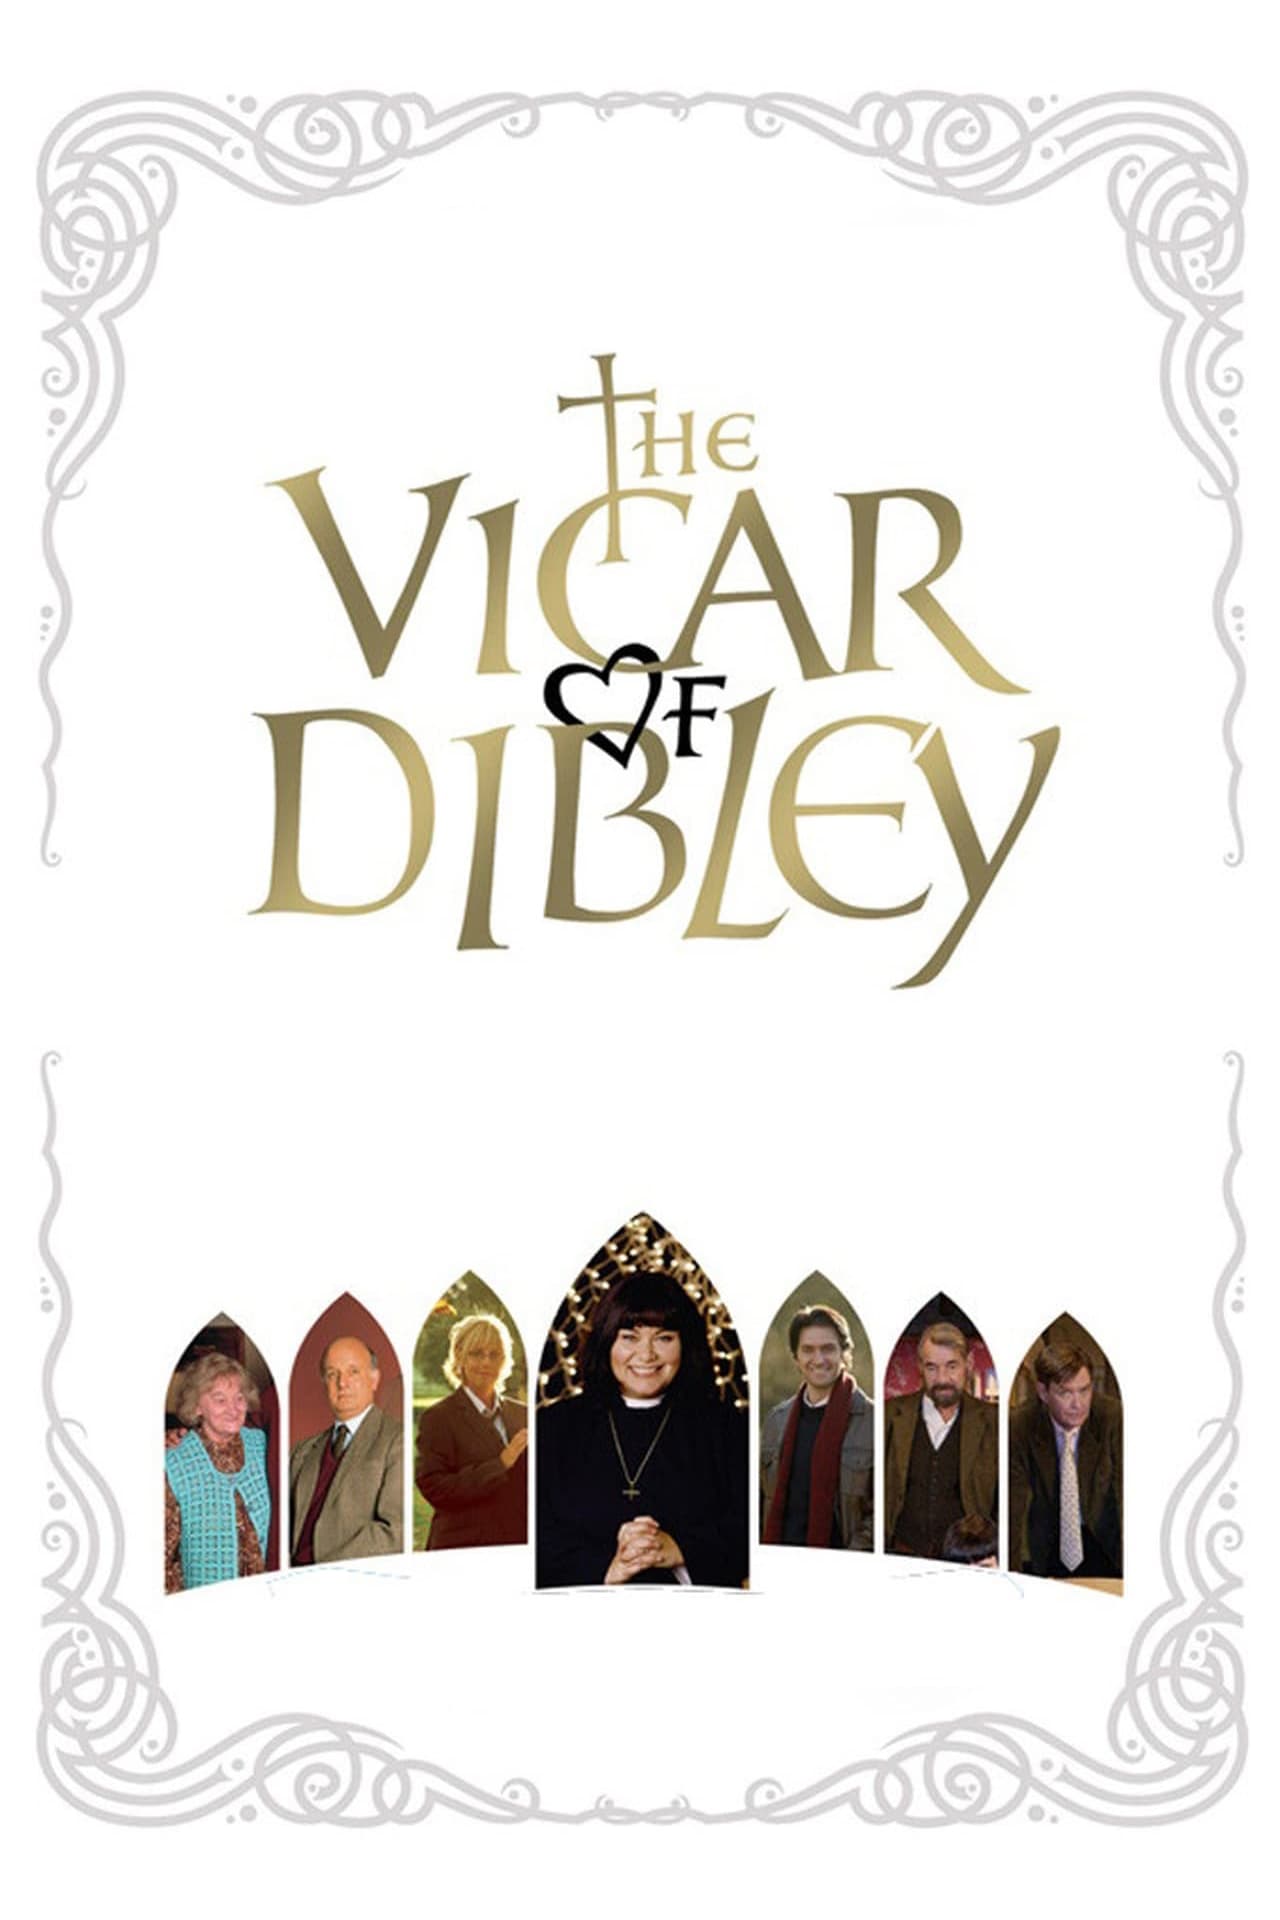 The Vicar of Dibley TV Shows About Sexual Humor